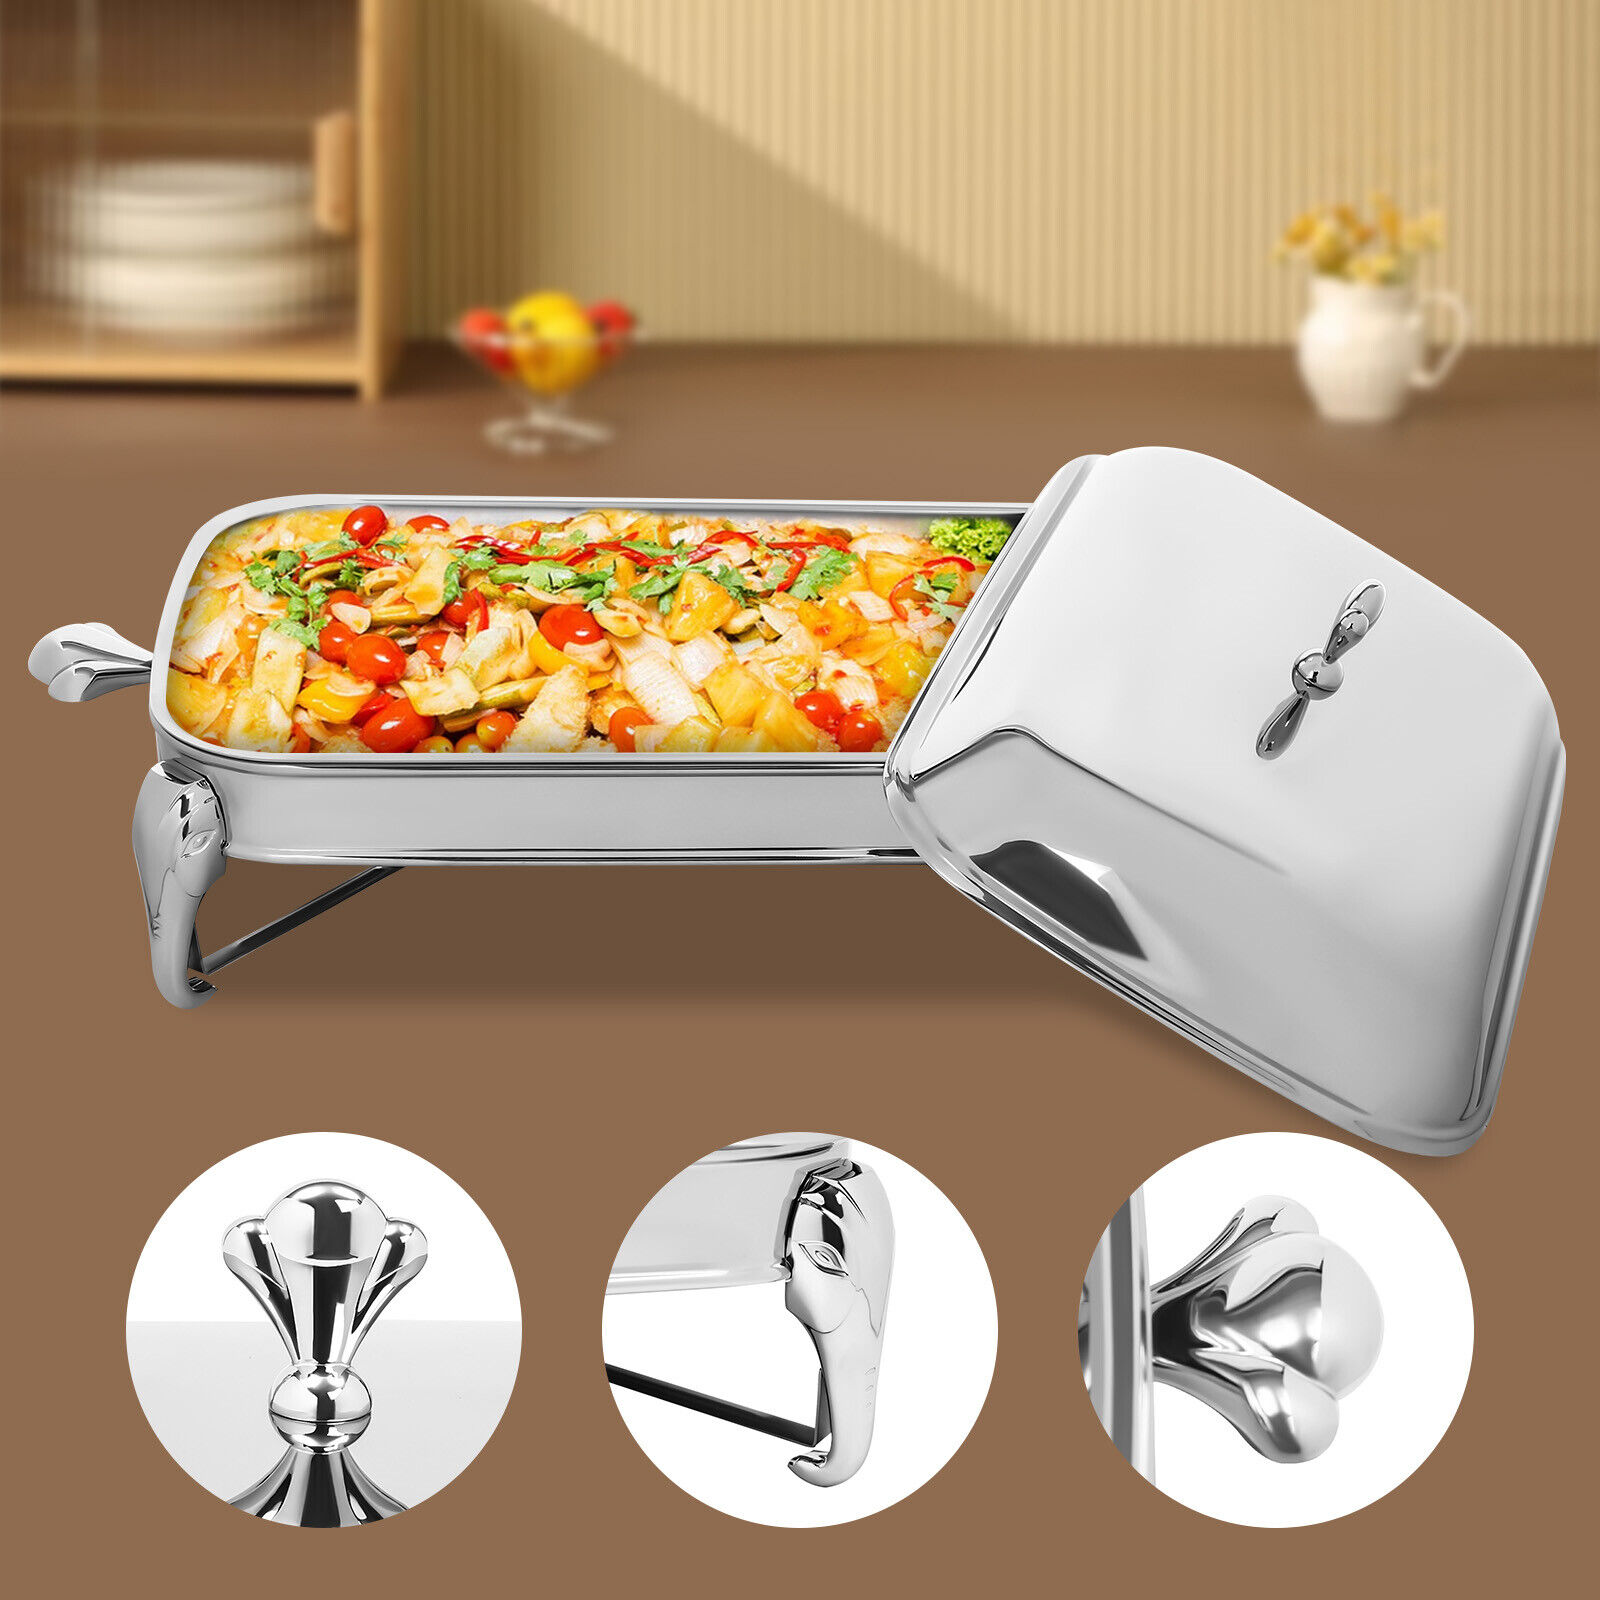 Stainless Steel 2.9L Silver Buffet Set Chafing Dish Rectangular Tray Food Warmer Unbranded